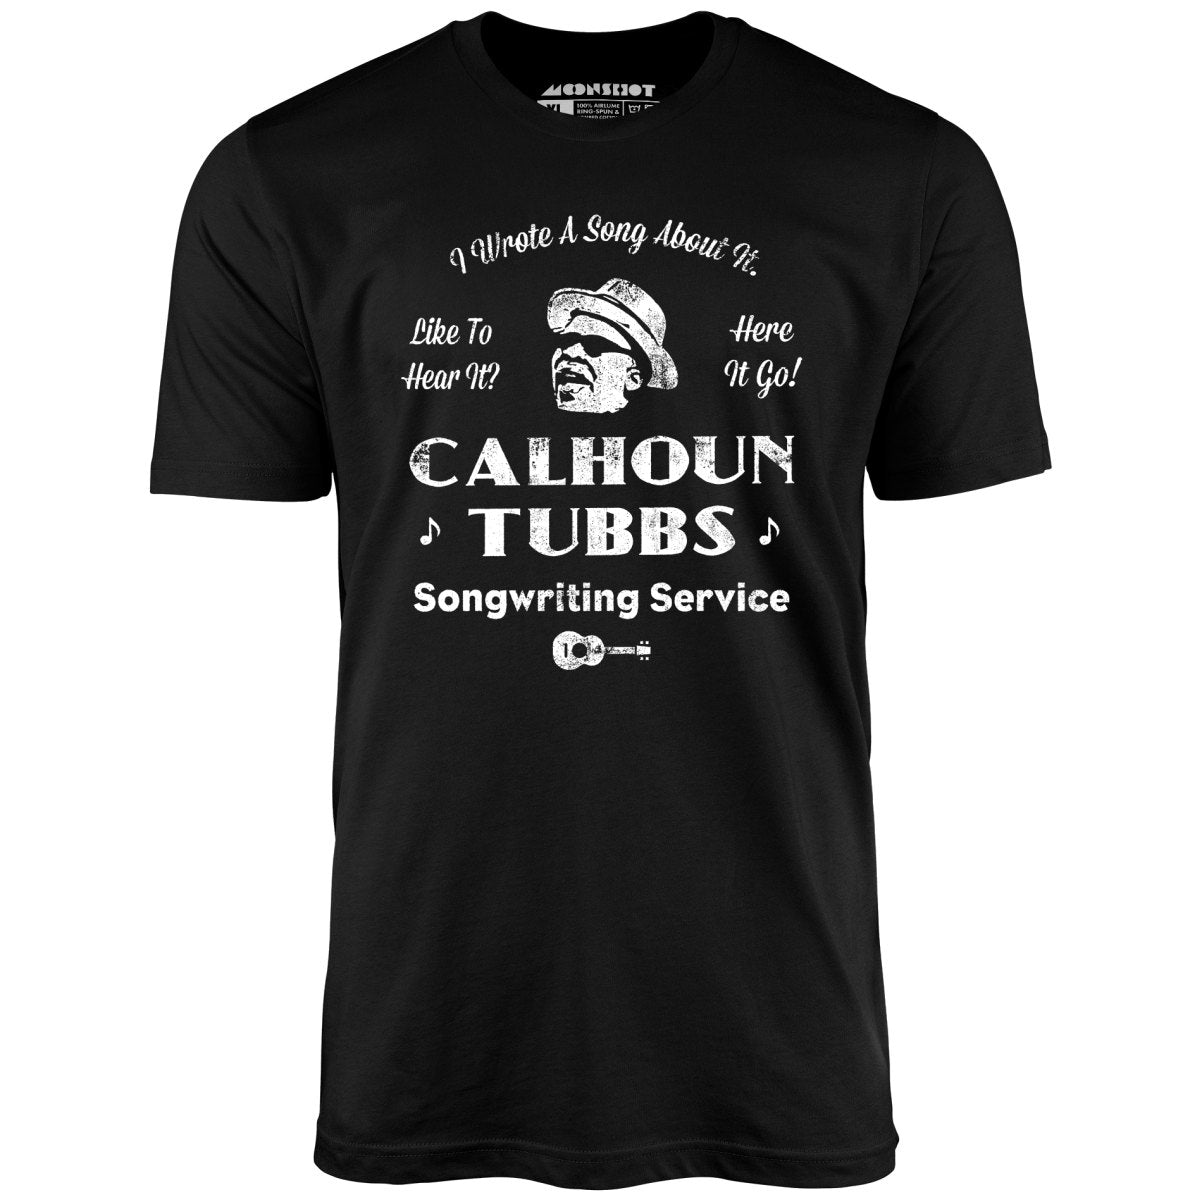 Calhoun Tubbs - I Wrote a Song About It - Unisex T-Shirt